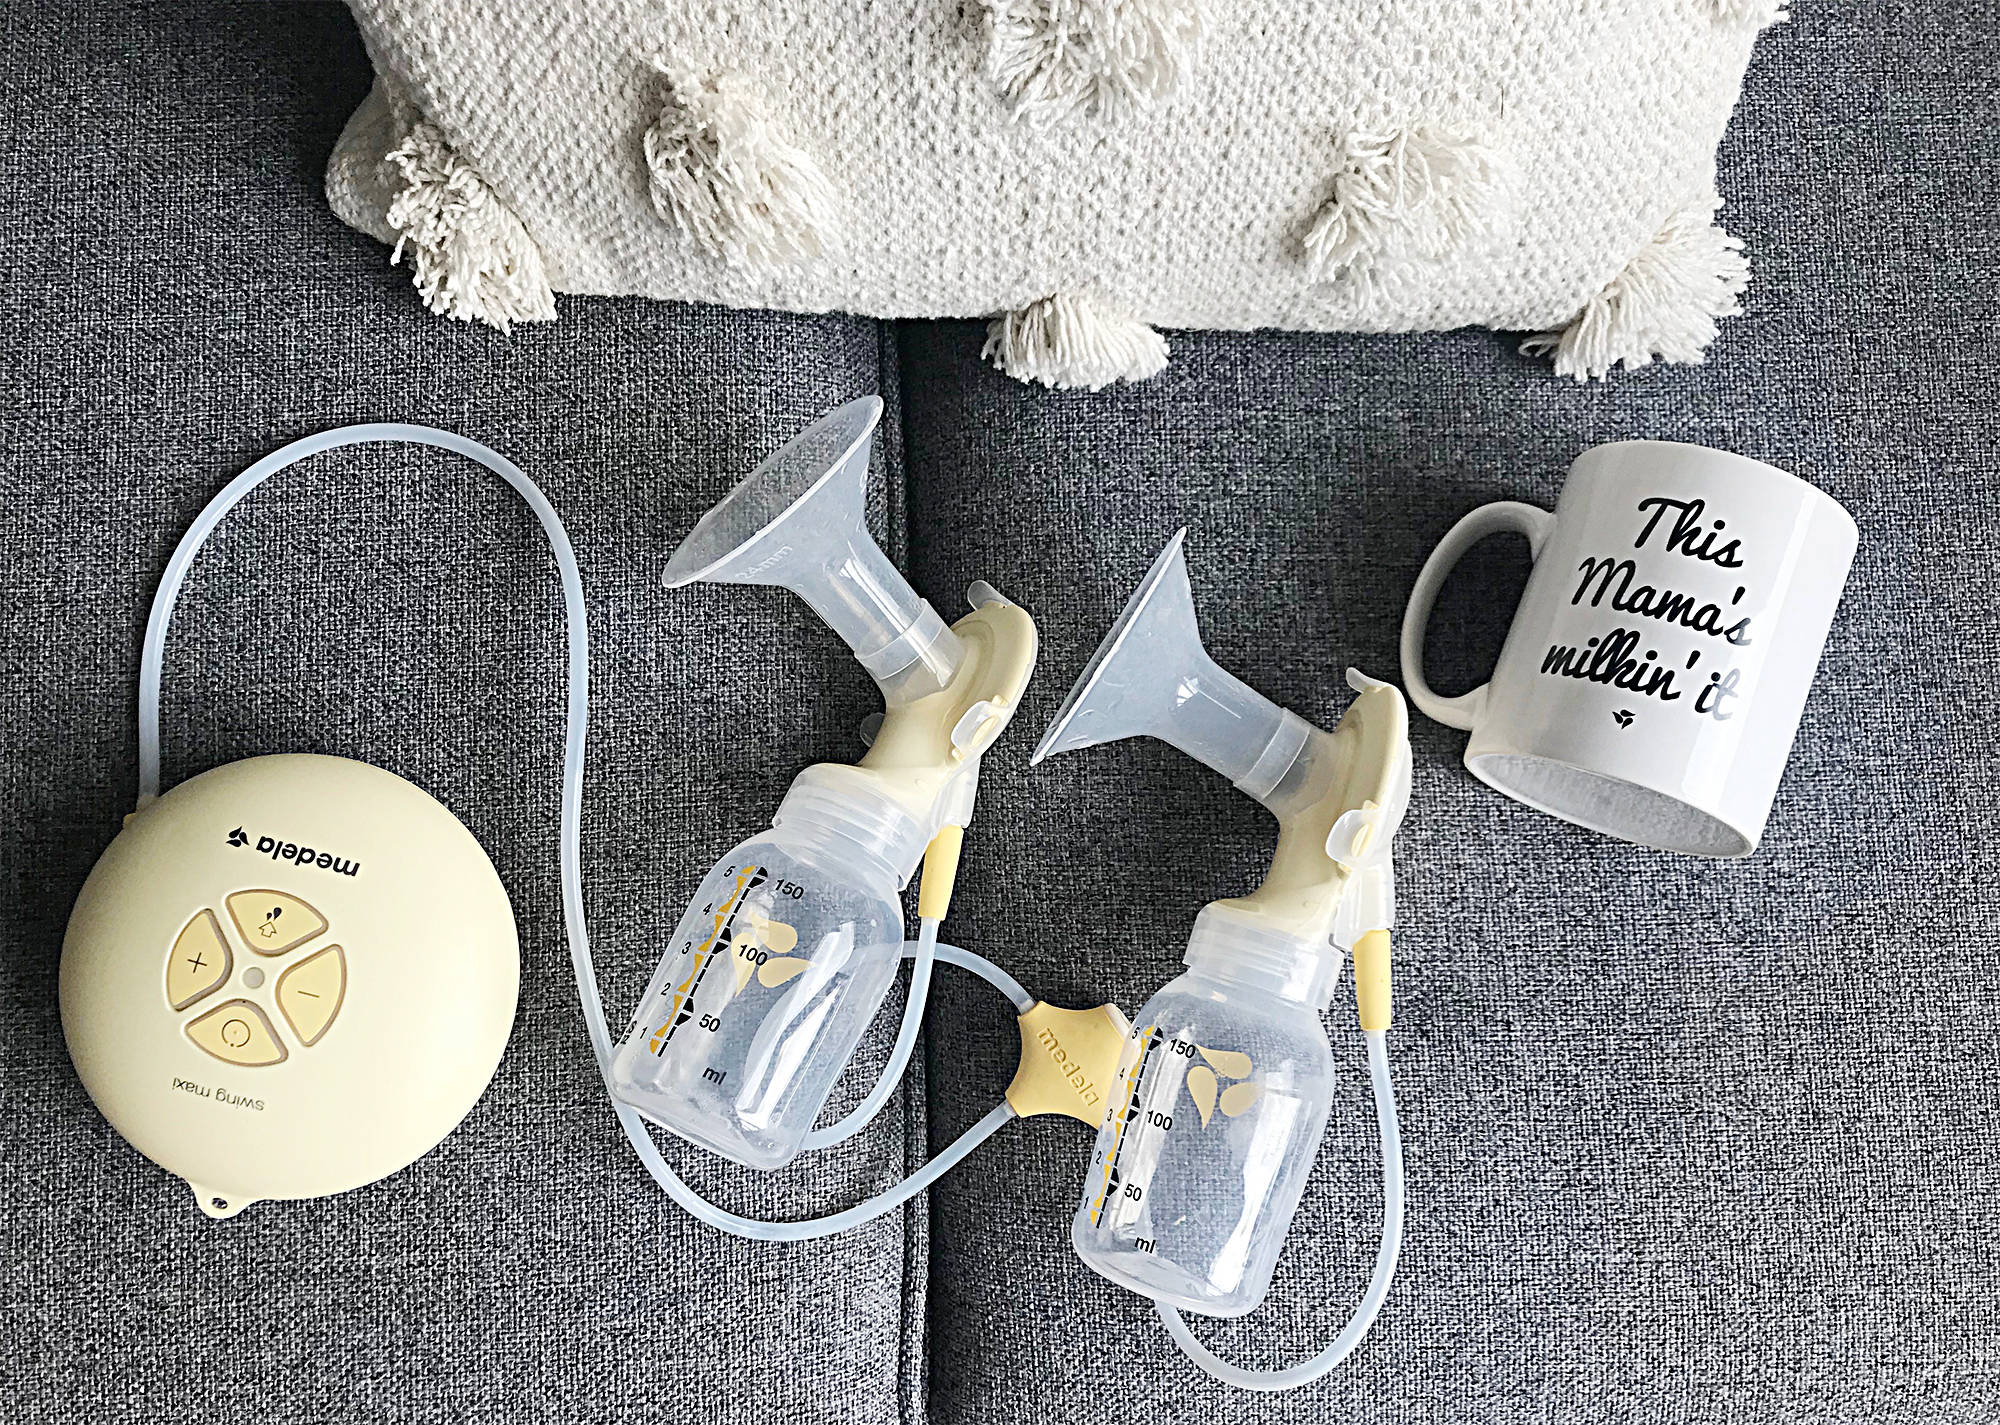 Milking it with my Medela Swing Maxi double Electric Breast Pump